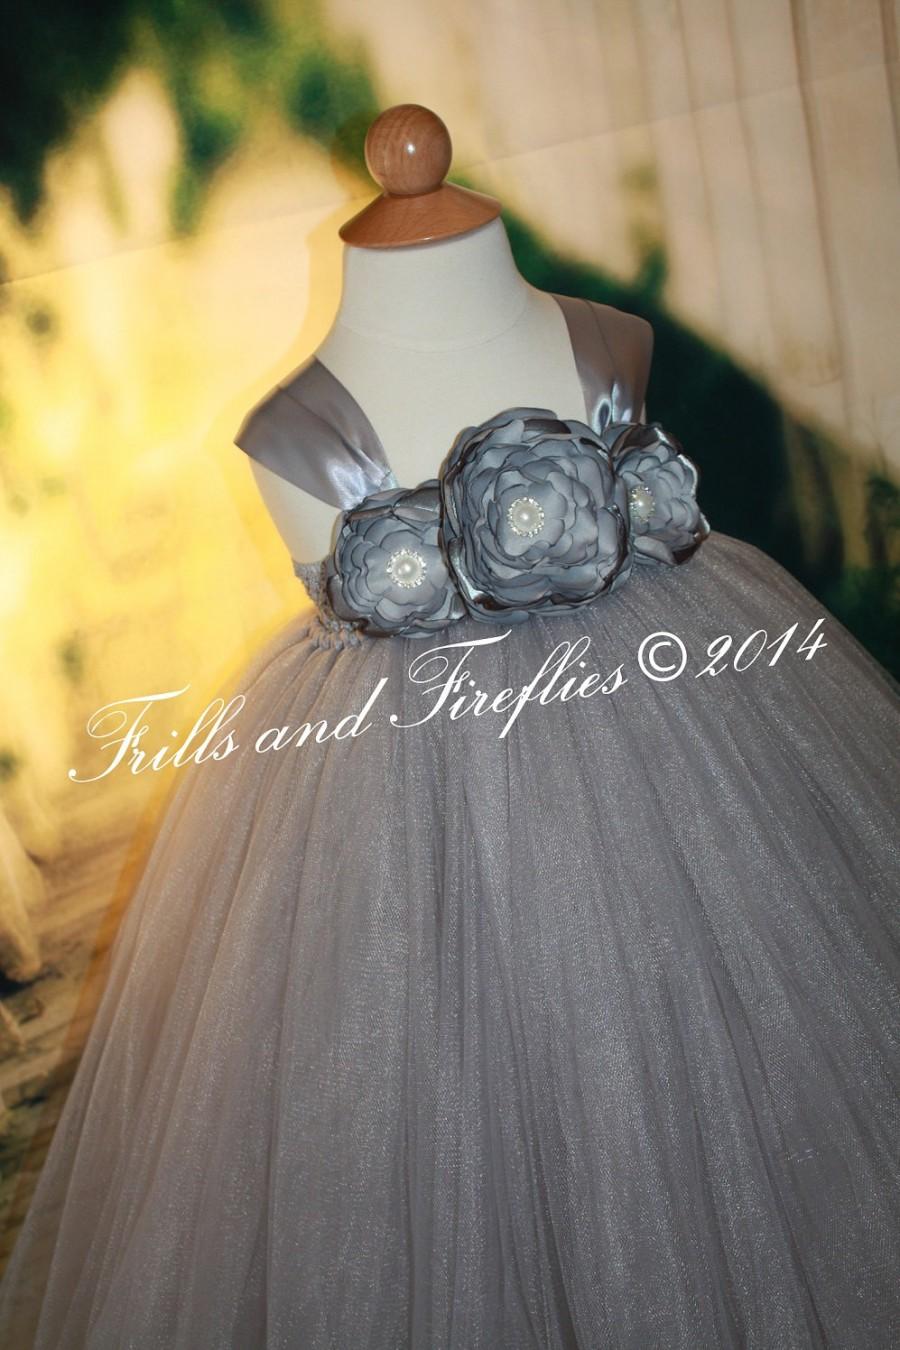 Wedding - Silver Gray/grey Flower girl Dress with Satin Flowers and Gray Satin Ribbon Shoulder Straps, Weddings, Birthdays 1t,2t,3t,4t,5t, 6, 8, 10